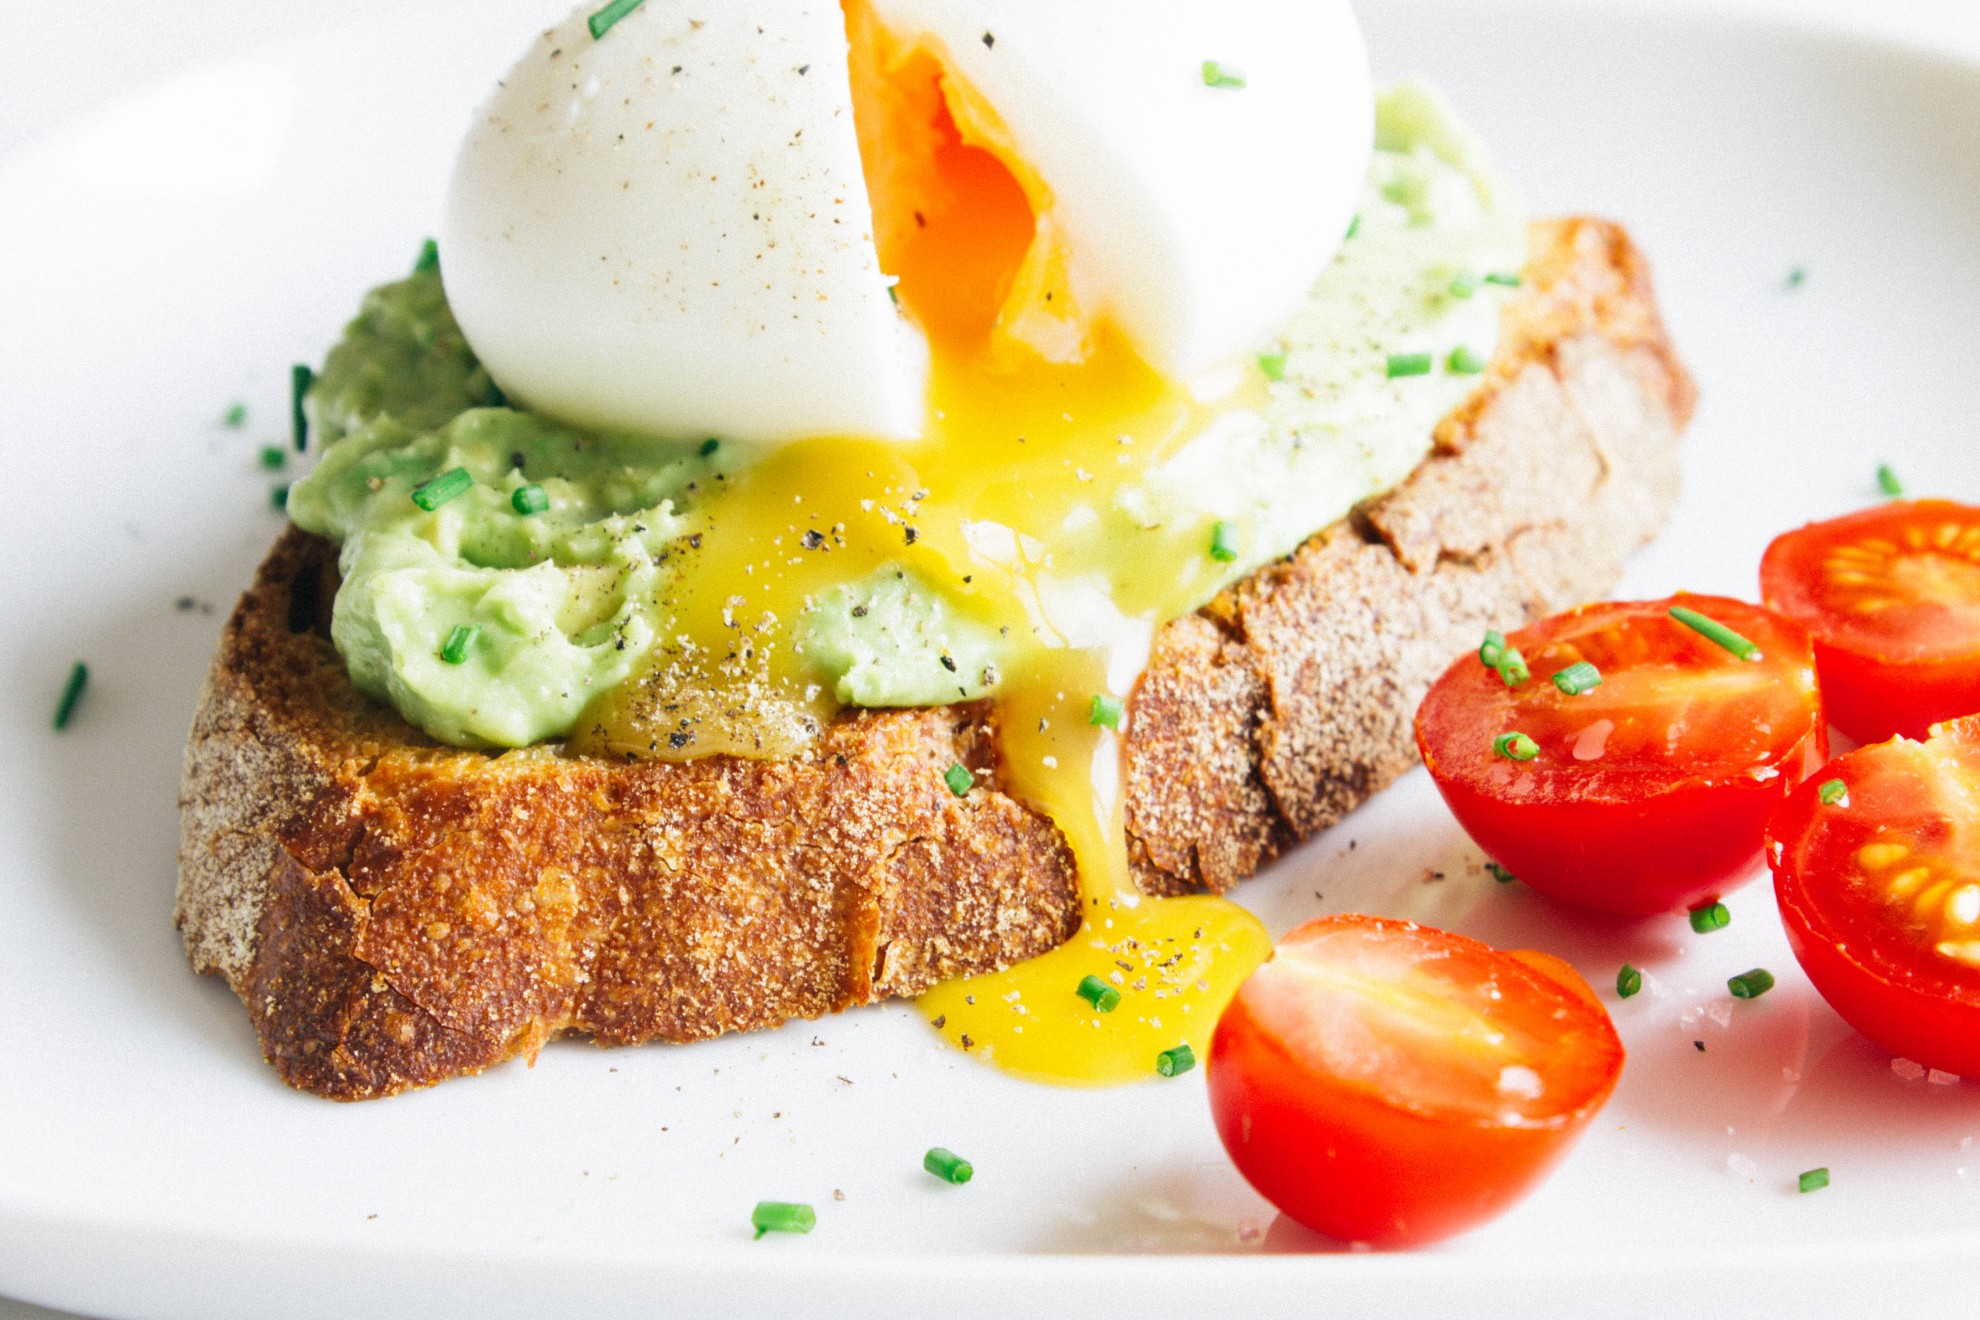 Avocado and soft-boiled egg toasts